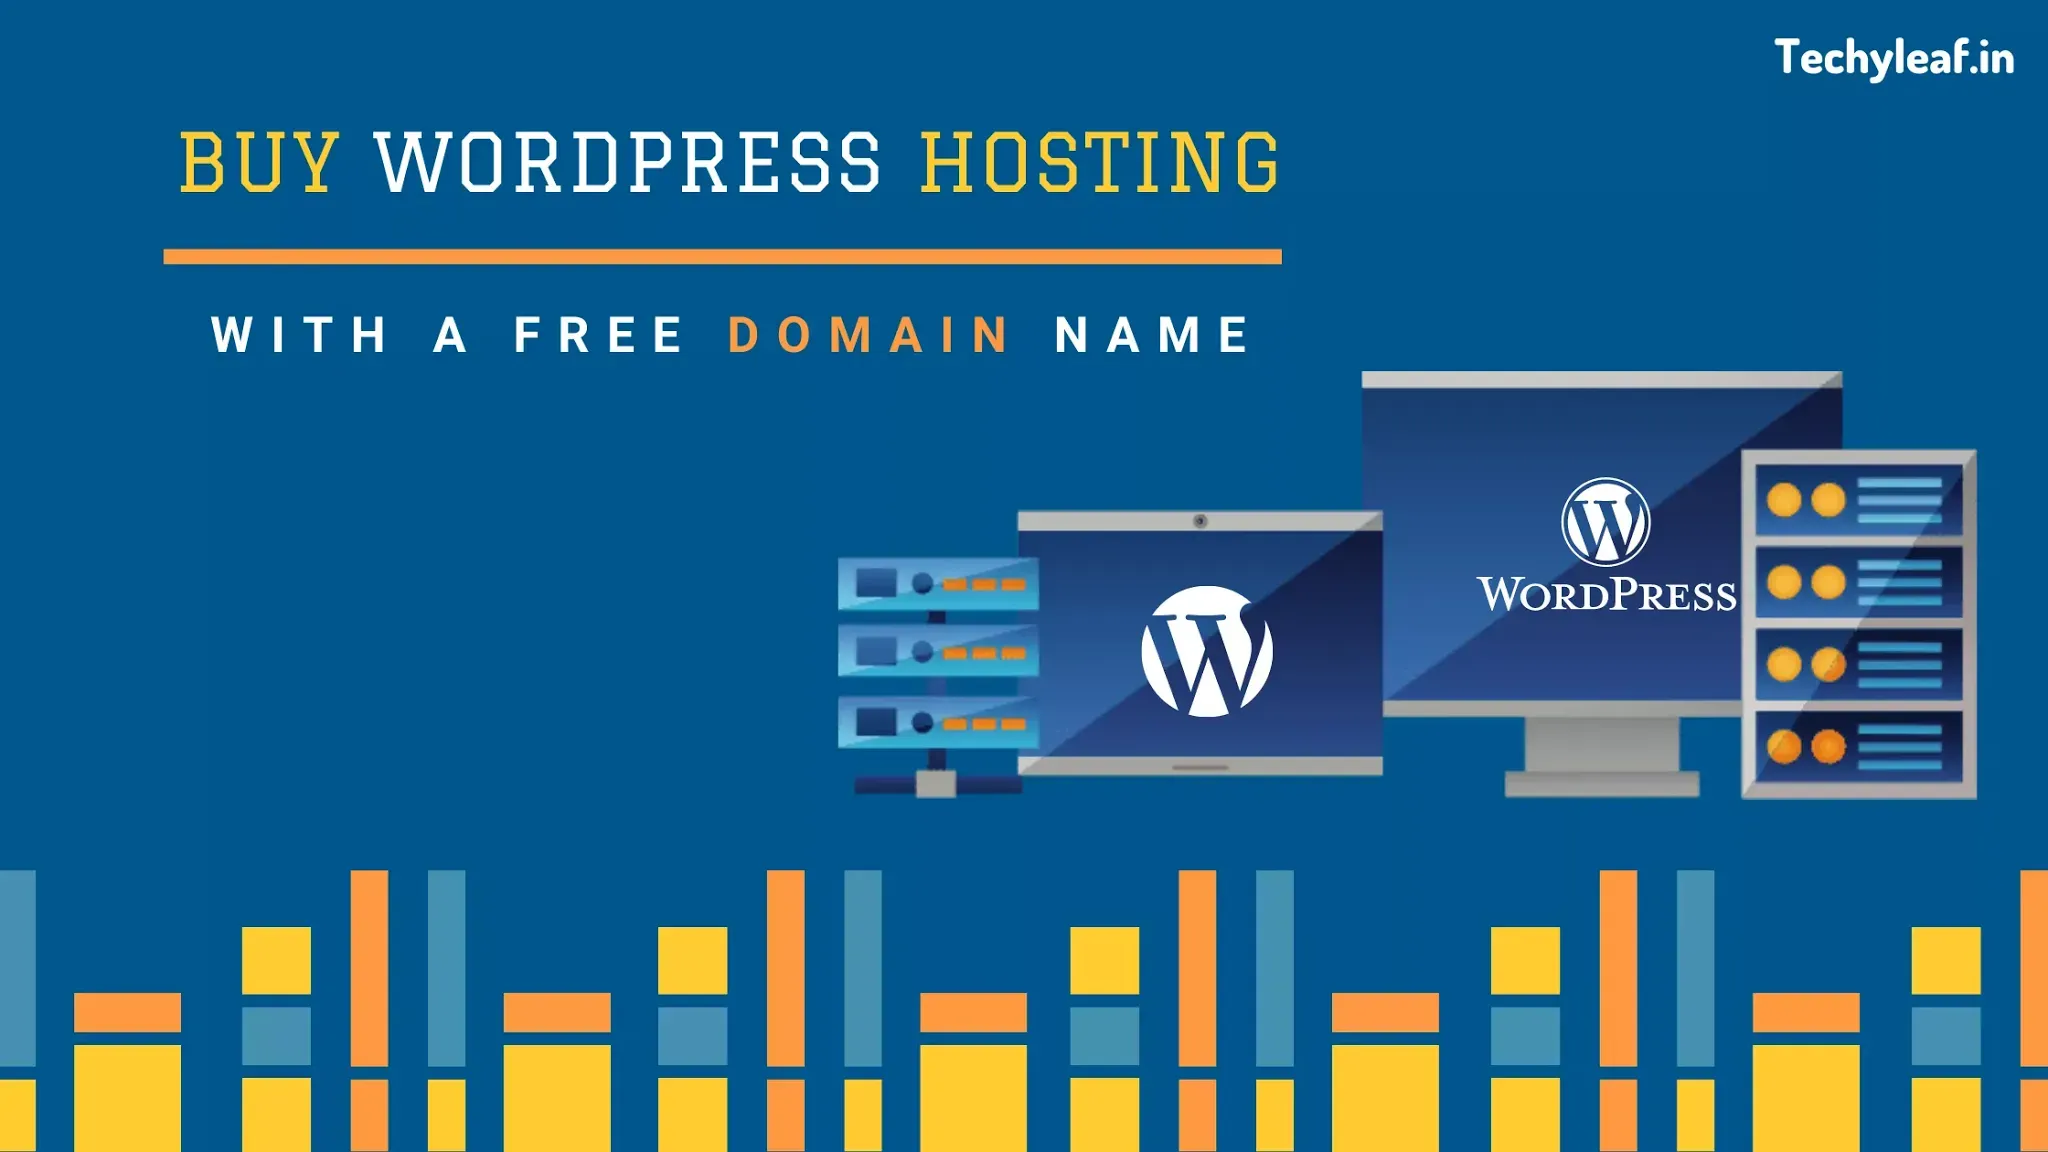 How to buy webhosting with a free domain name